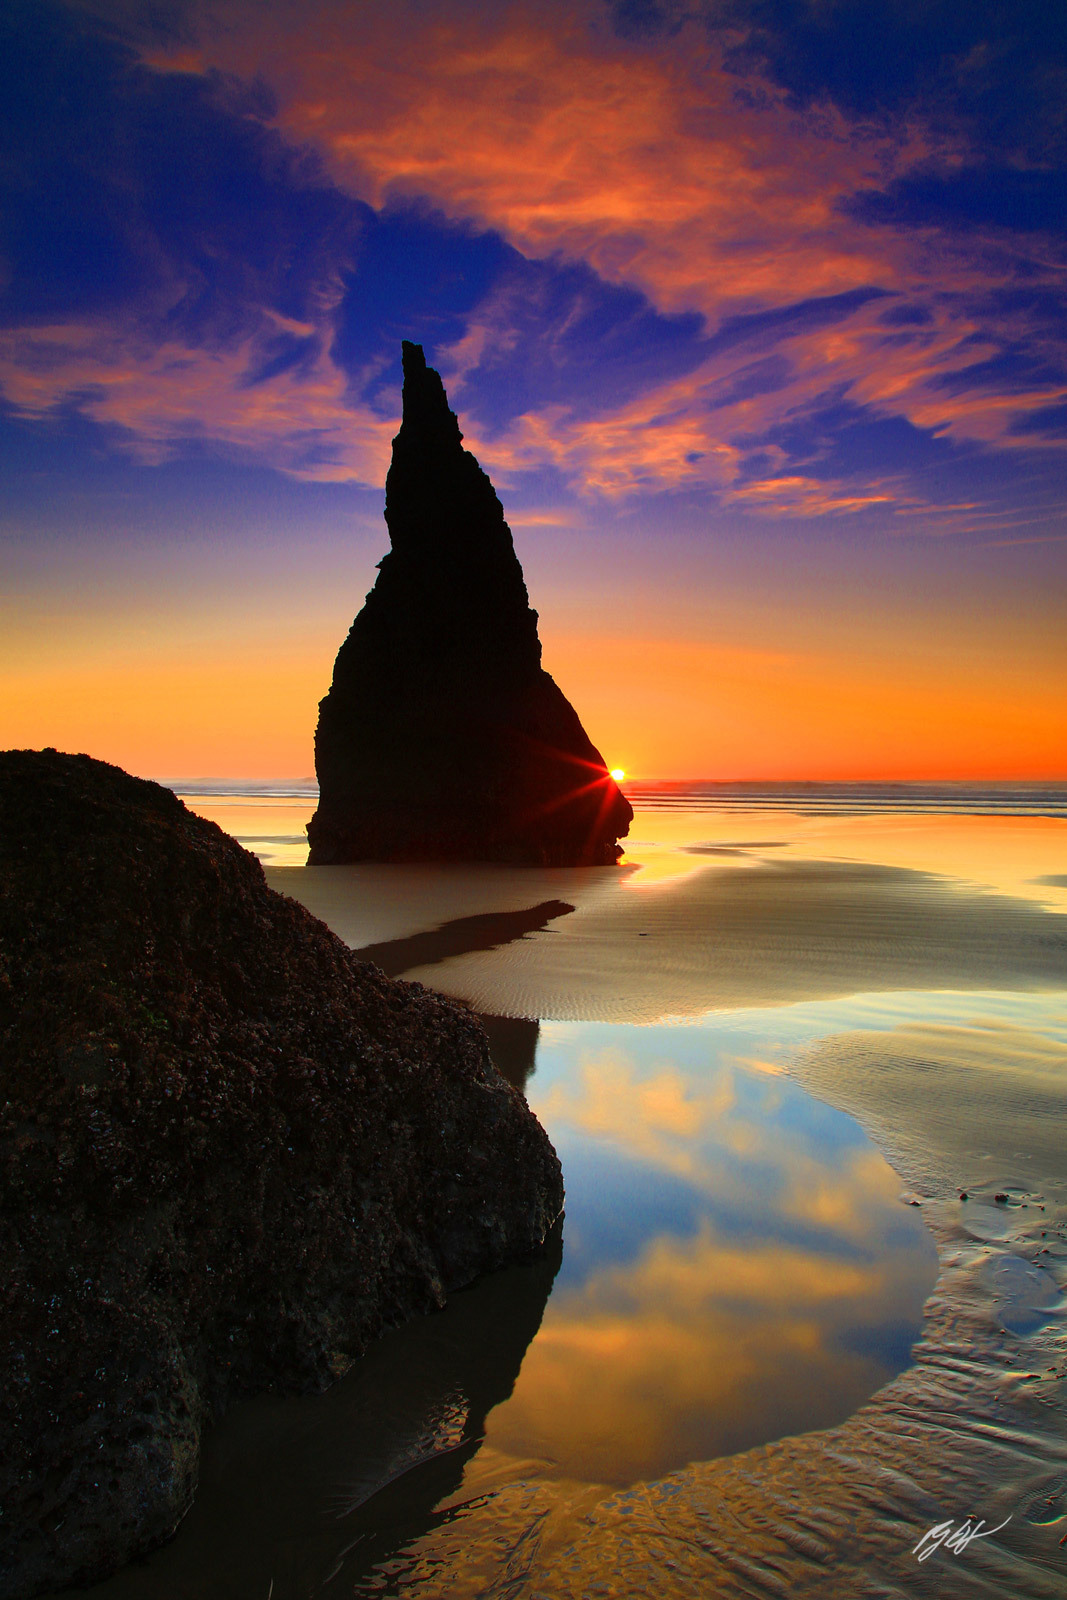 Sunset and Sunstar with the Wizards Hat from Face Rock Beach in Bandon Oregon